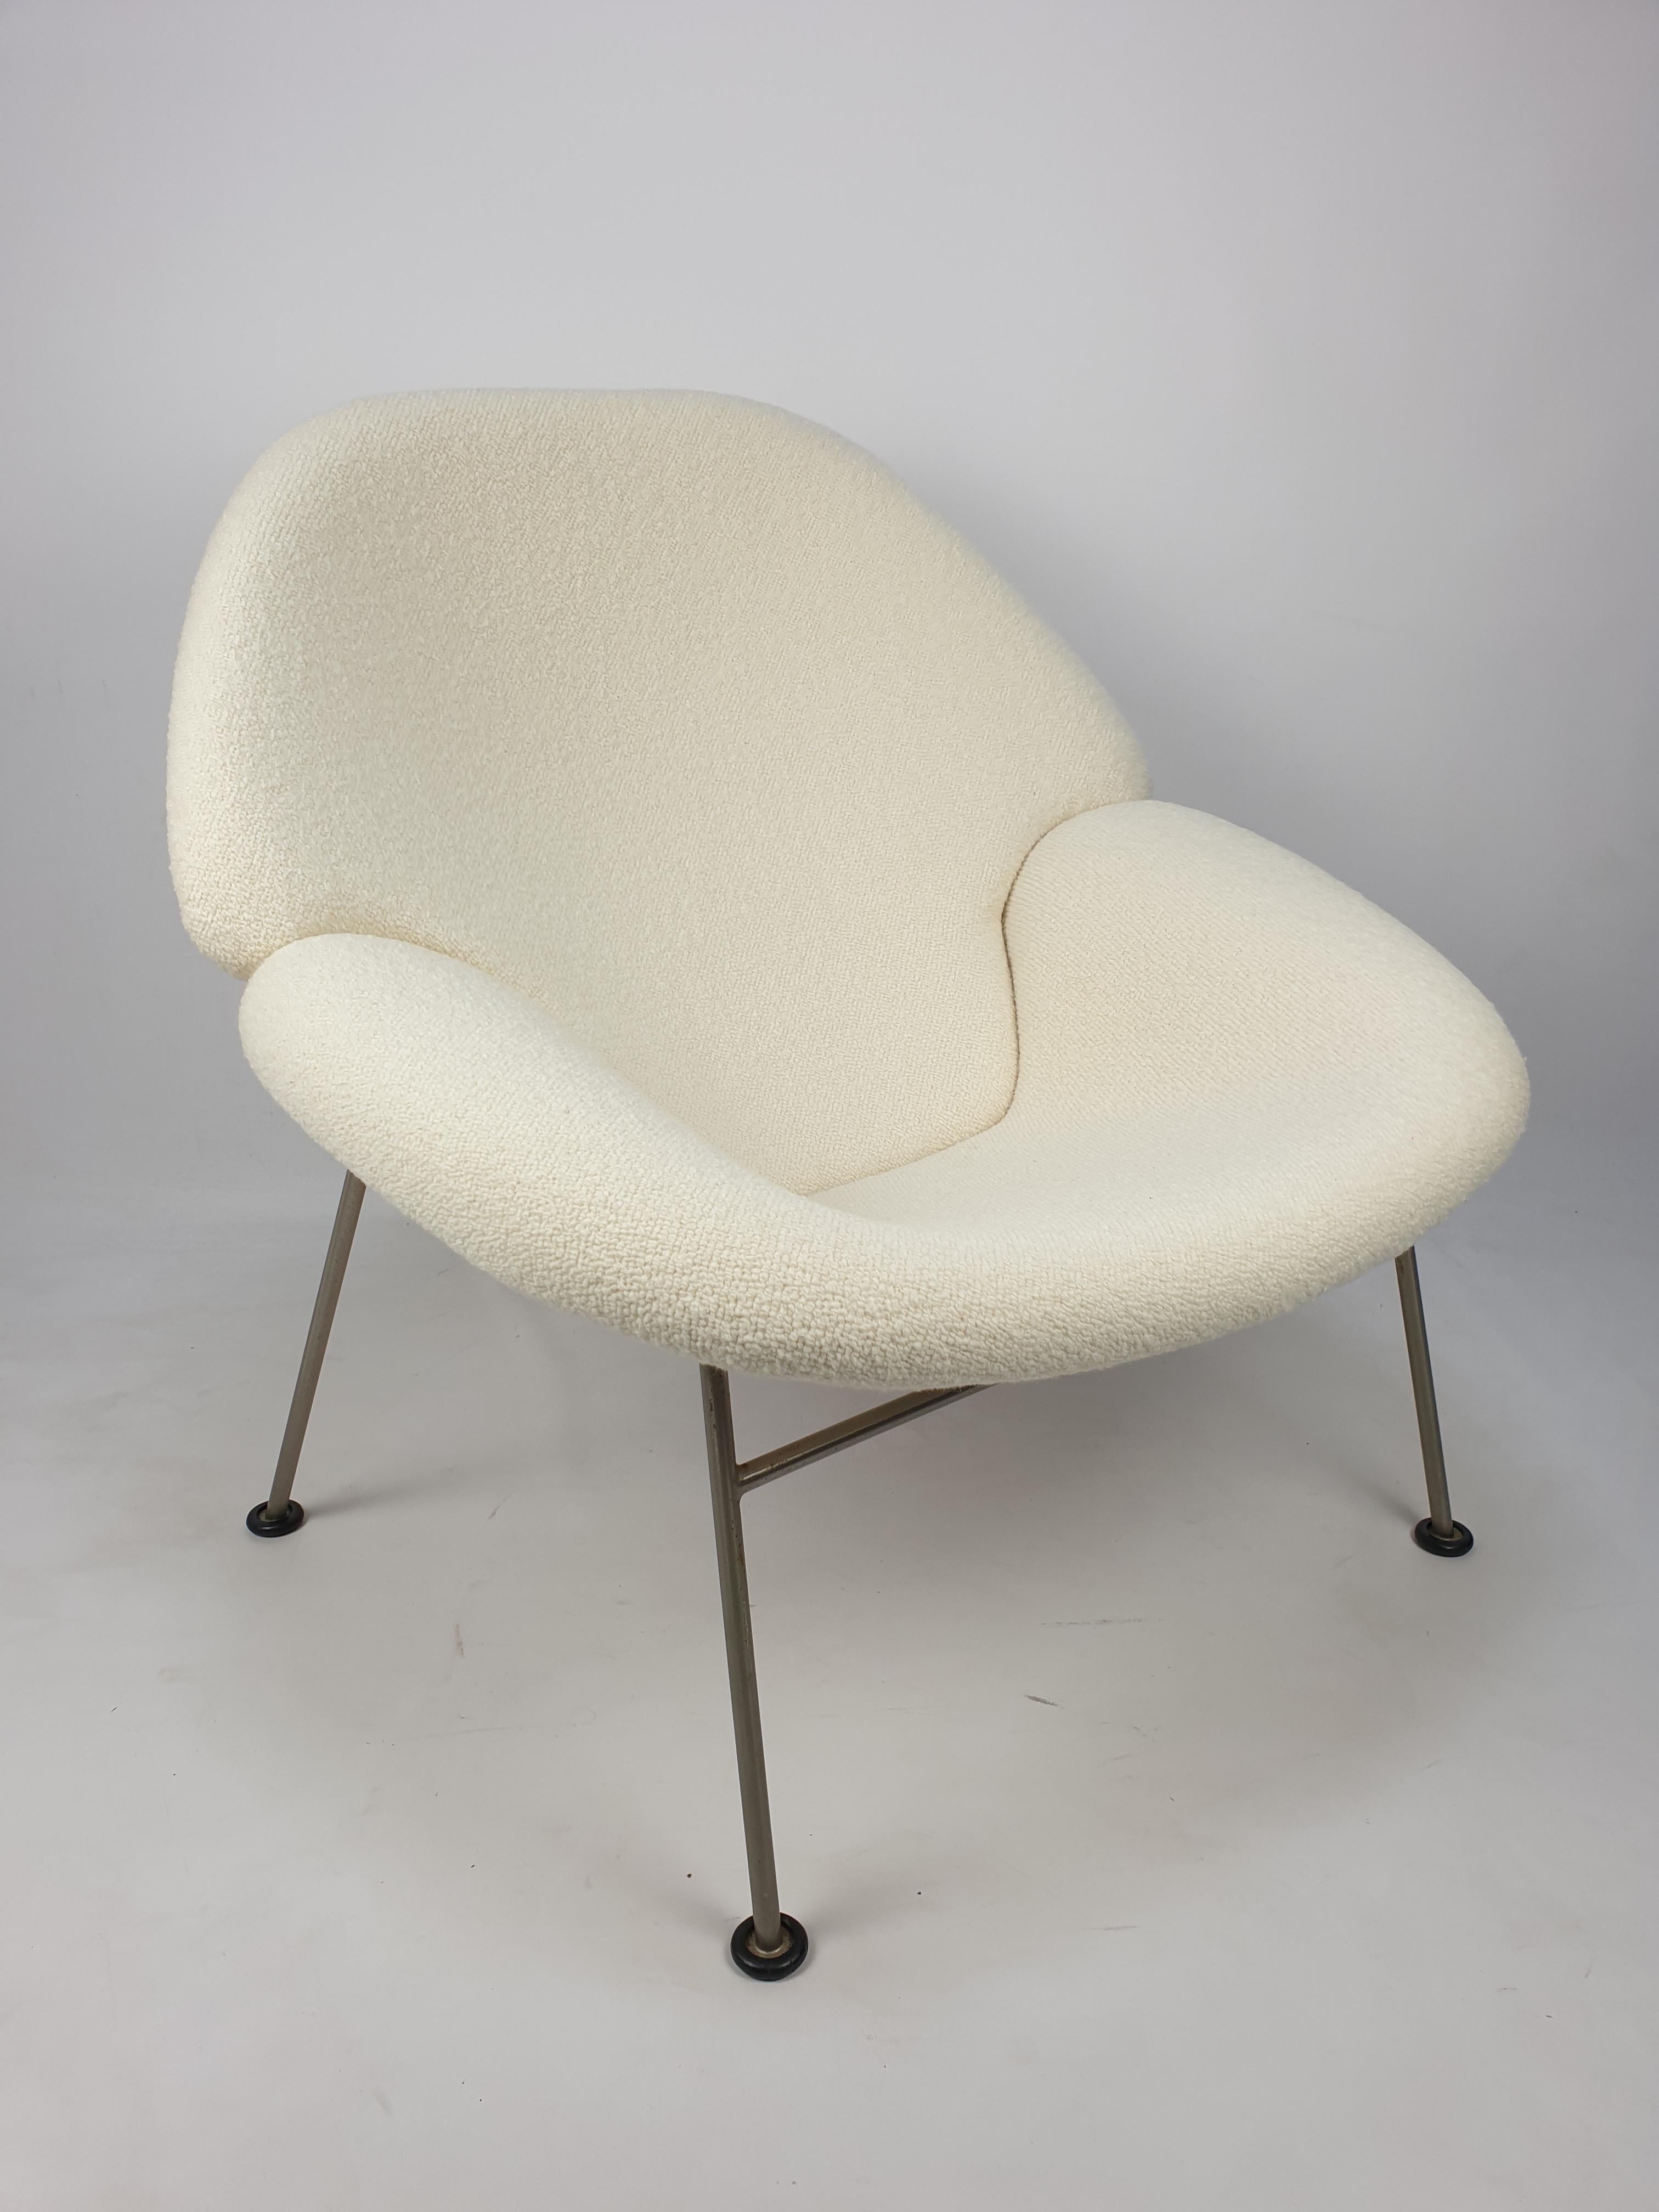 Very rare F555 model, designed by Pierre Paulin for Artifort in the 60's.
Just upholstered with new foam and lovely Pierre Frey bouclé fabric. The chair is in perfect condition. Very comfortable chair!
  